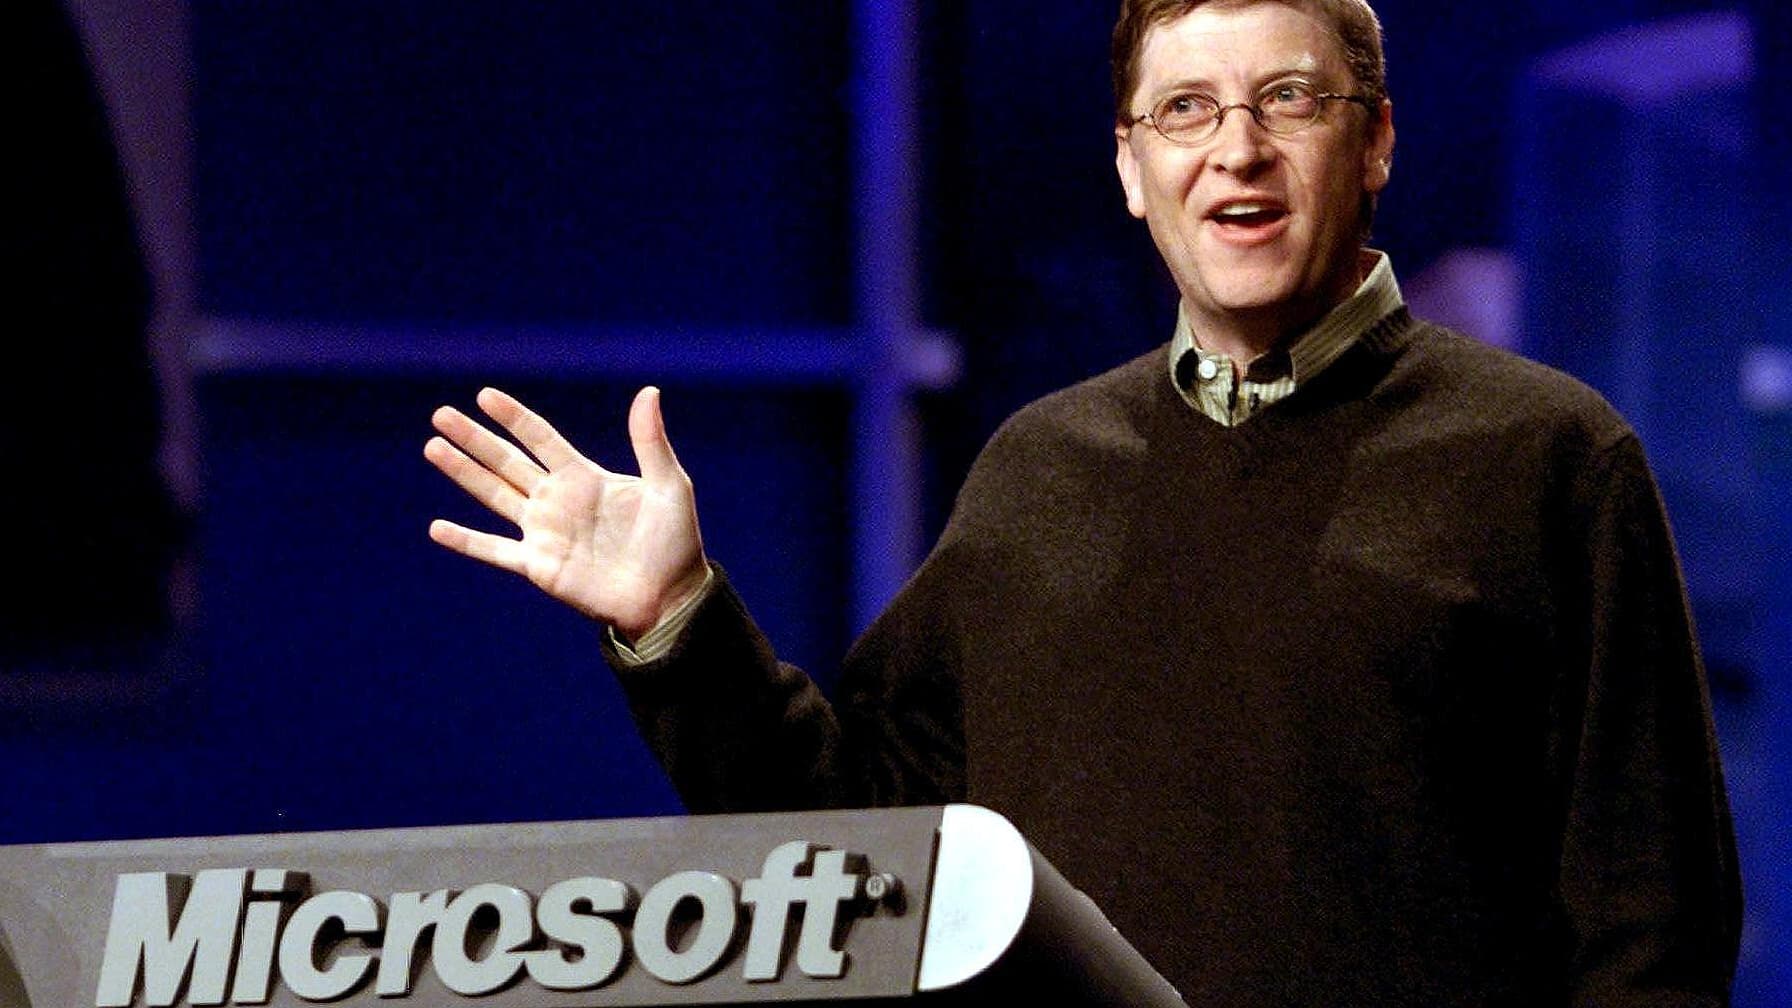 Obsessed with records, Bill Gates played Minesweeper so much that the game took away from him